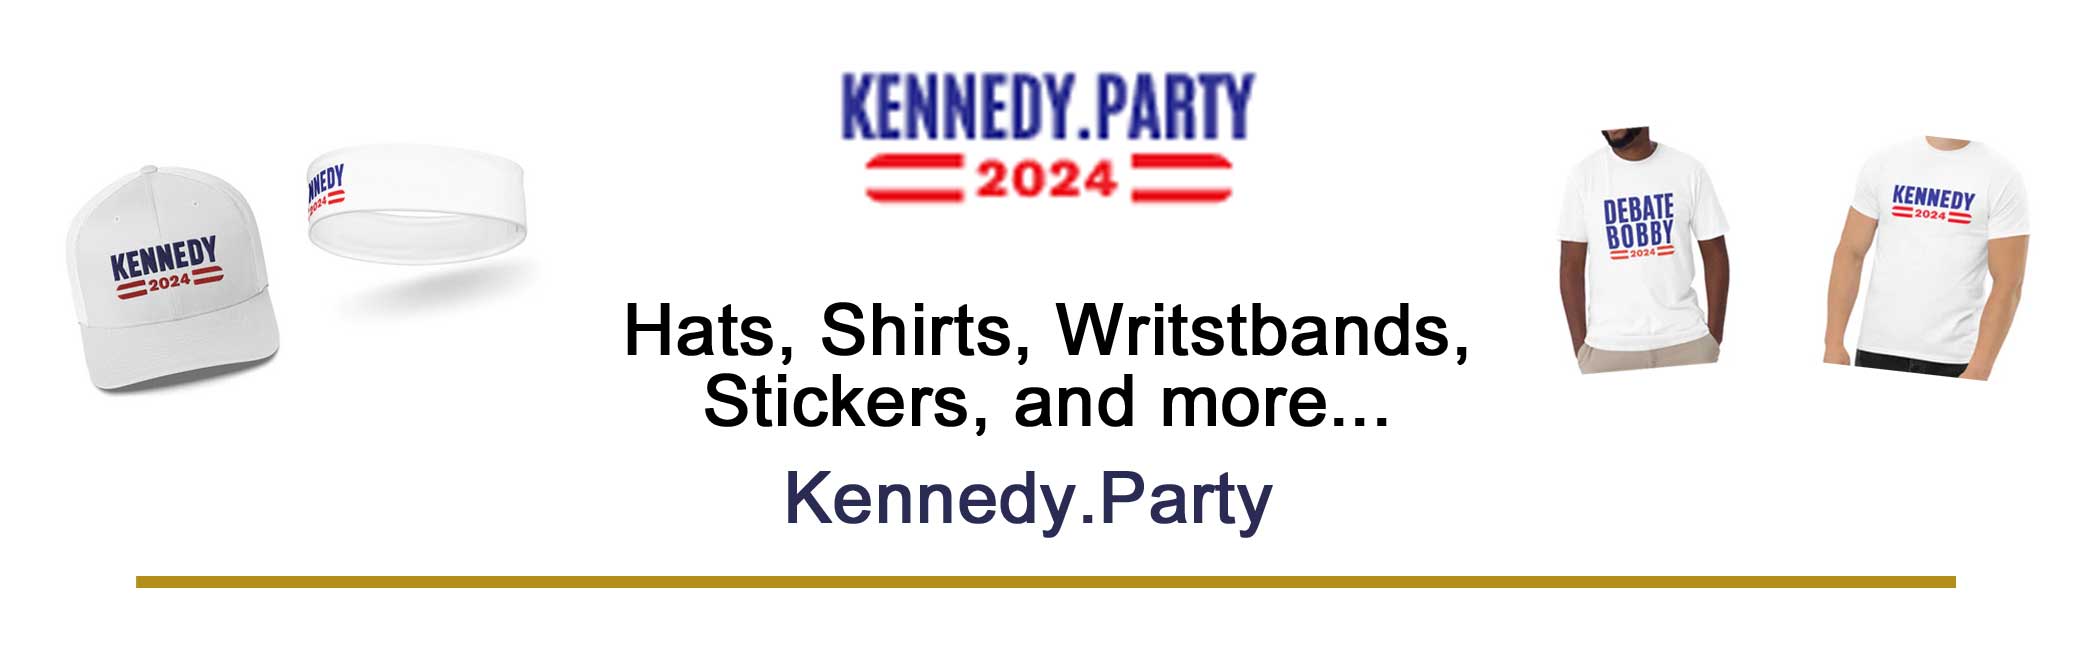 Kennedy Party